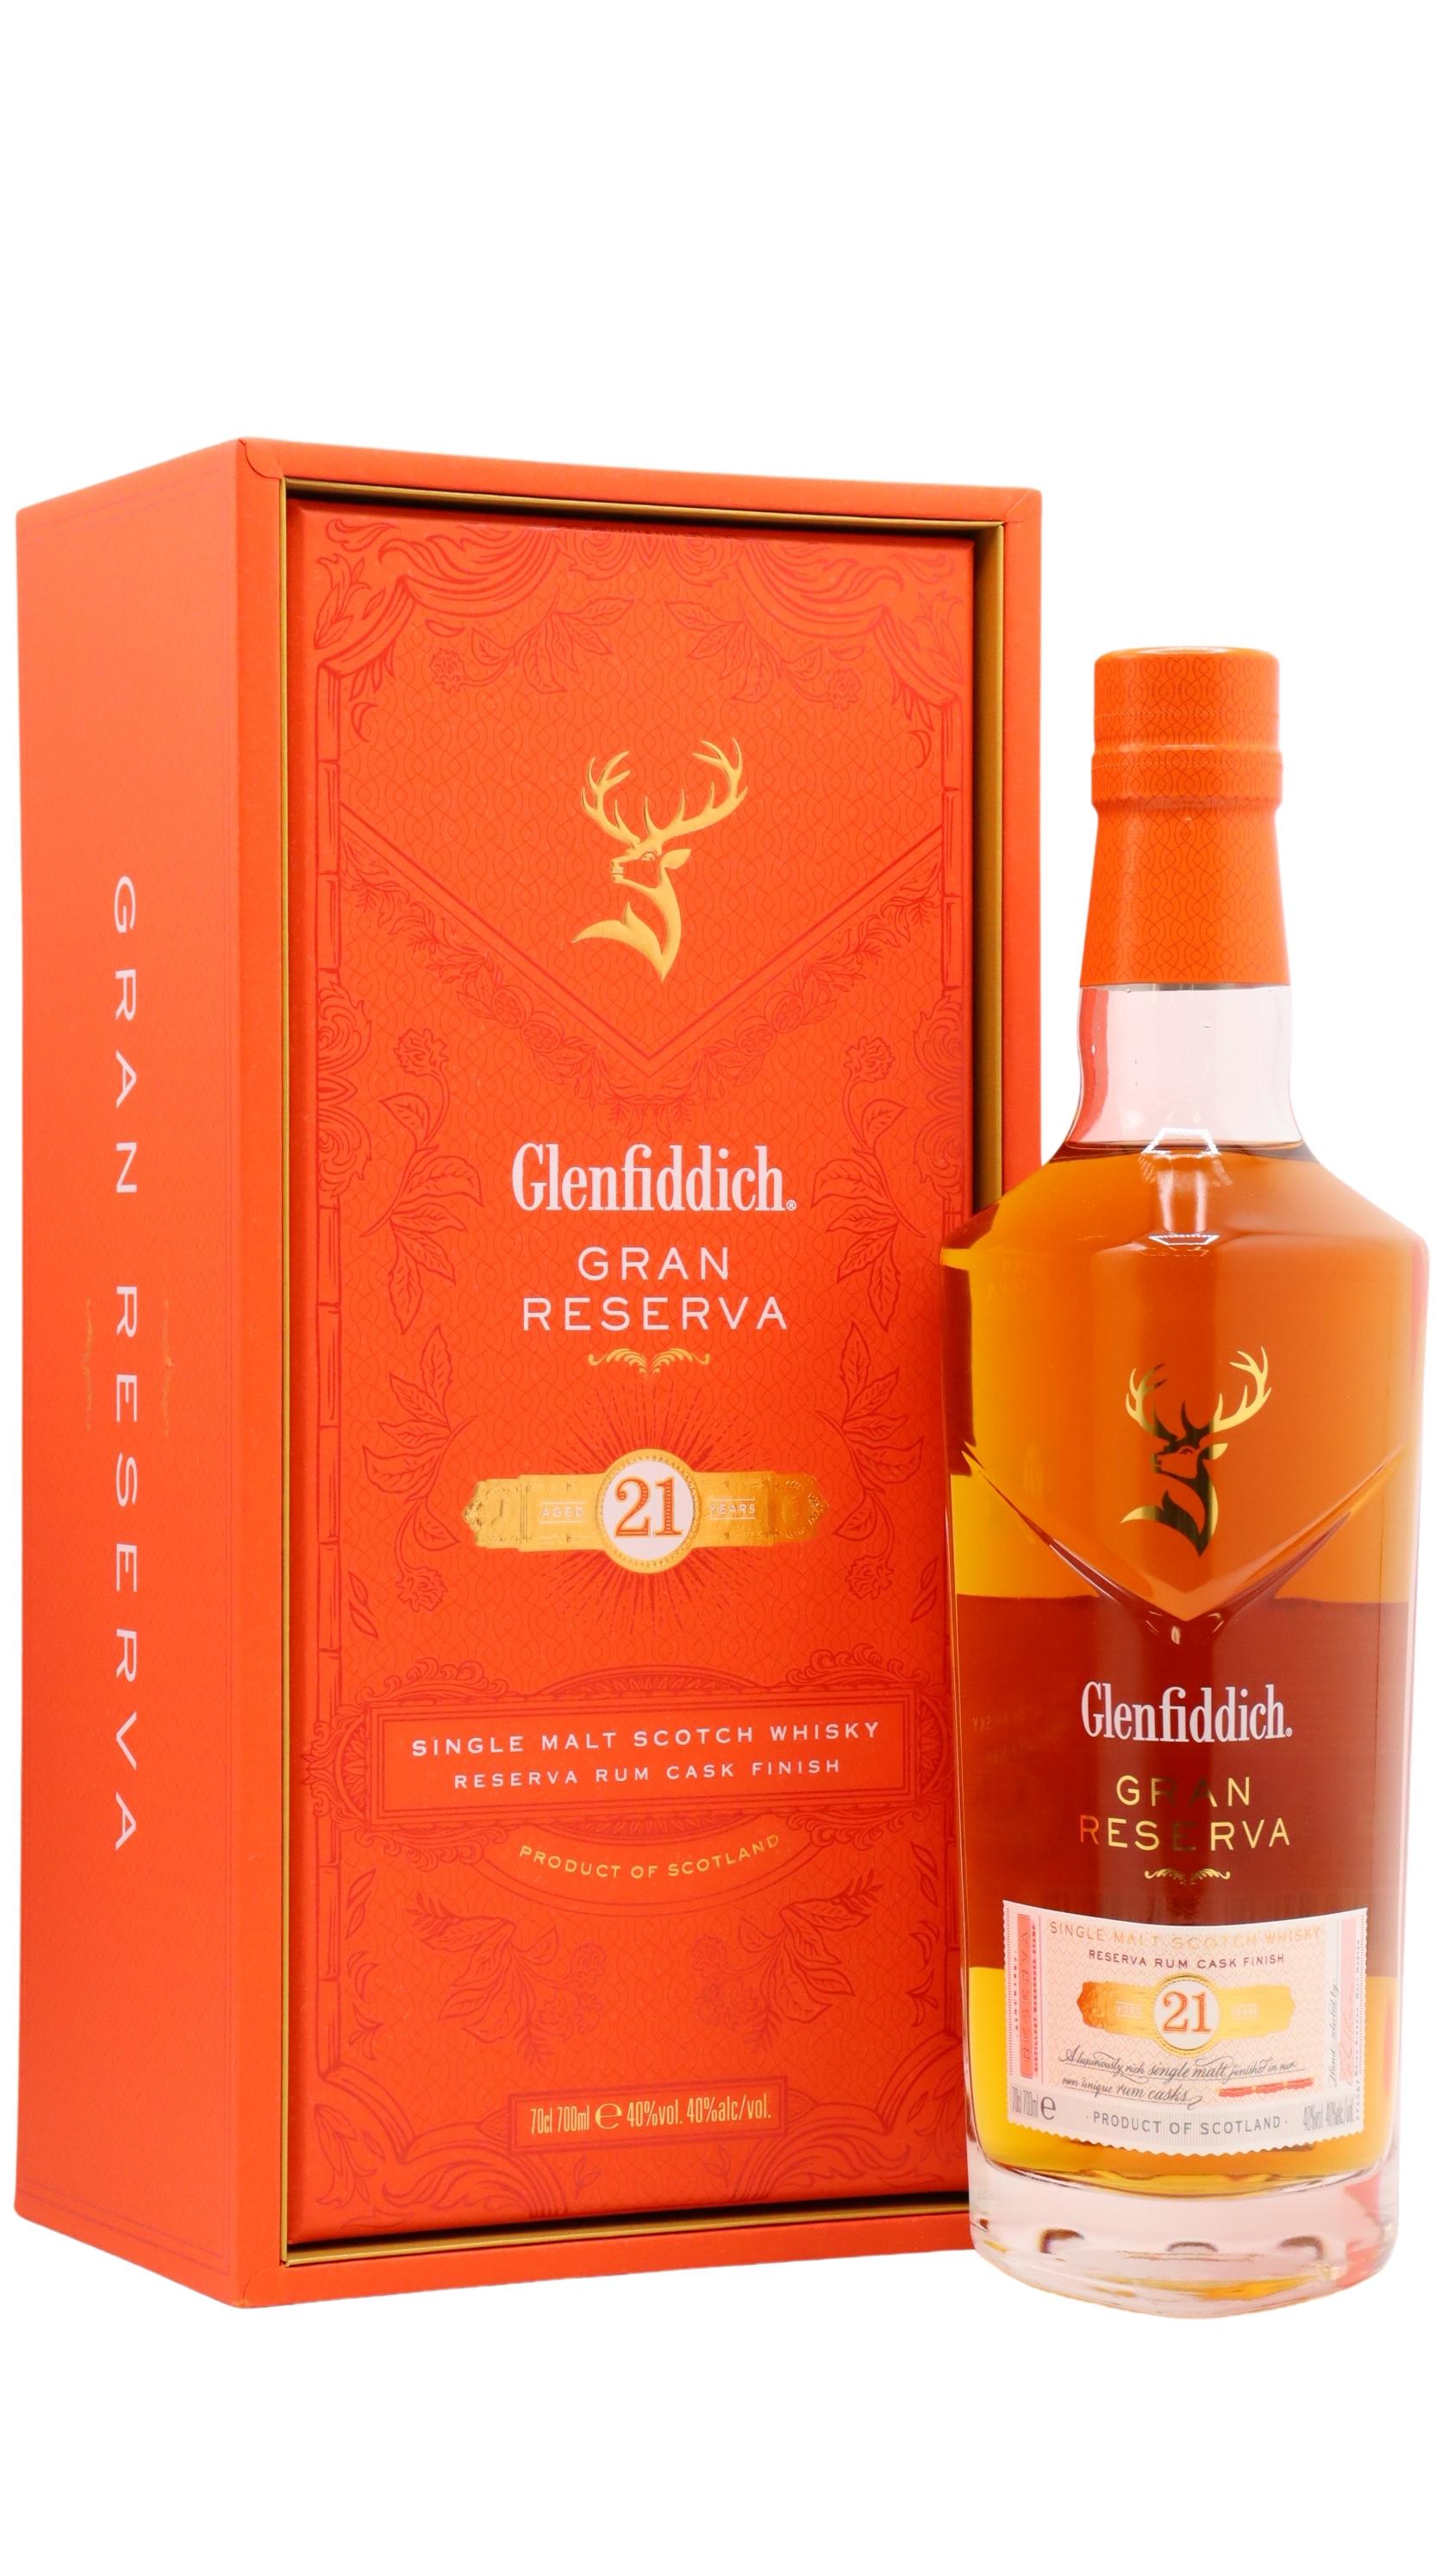 Glenfiddich - Gran Reserva Rum Cask Finish 21 year old Whisky 70CL ...